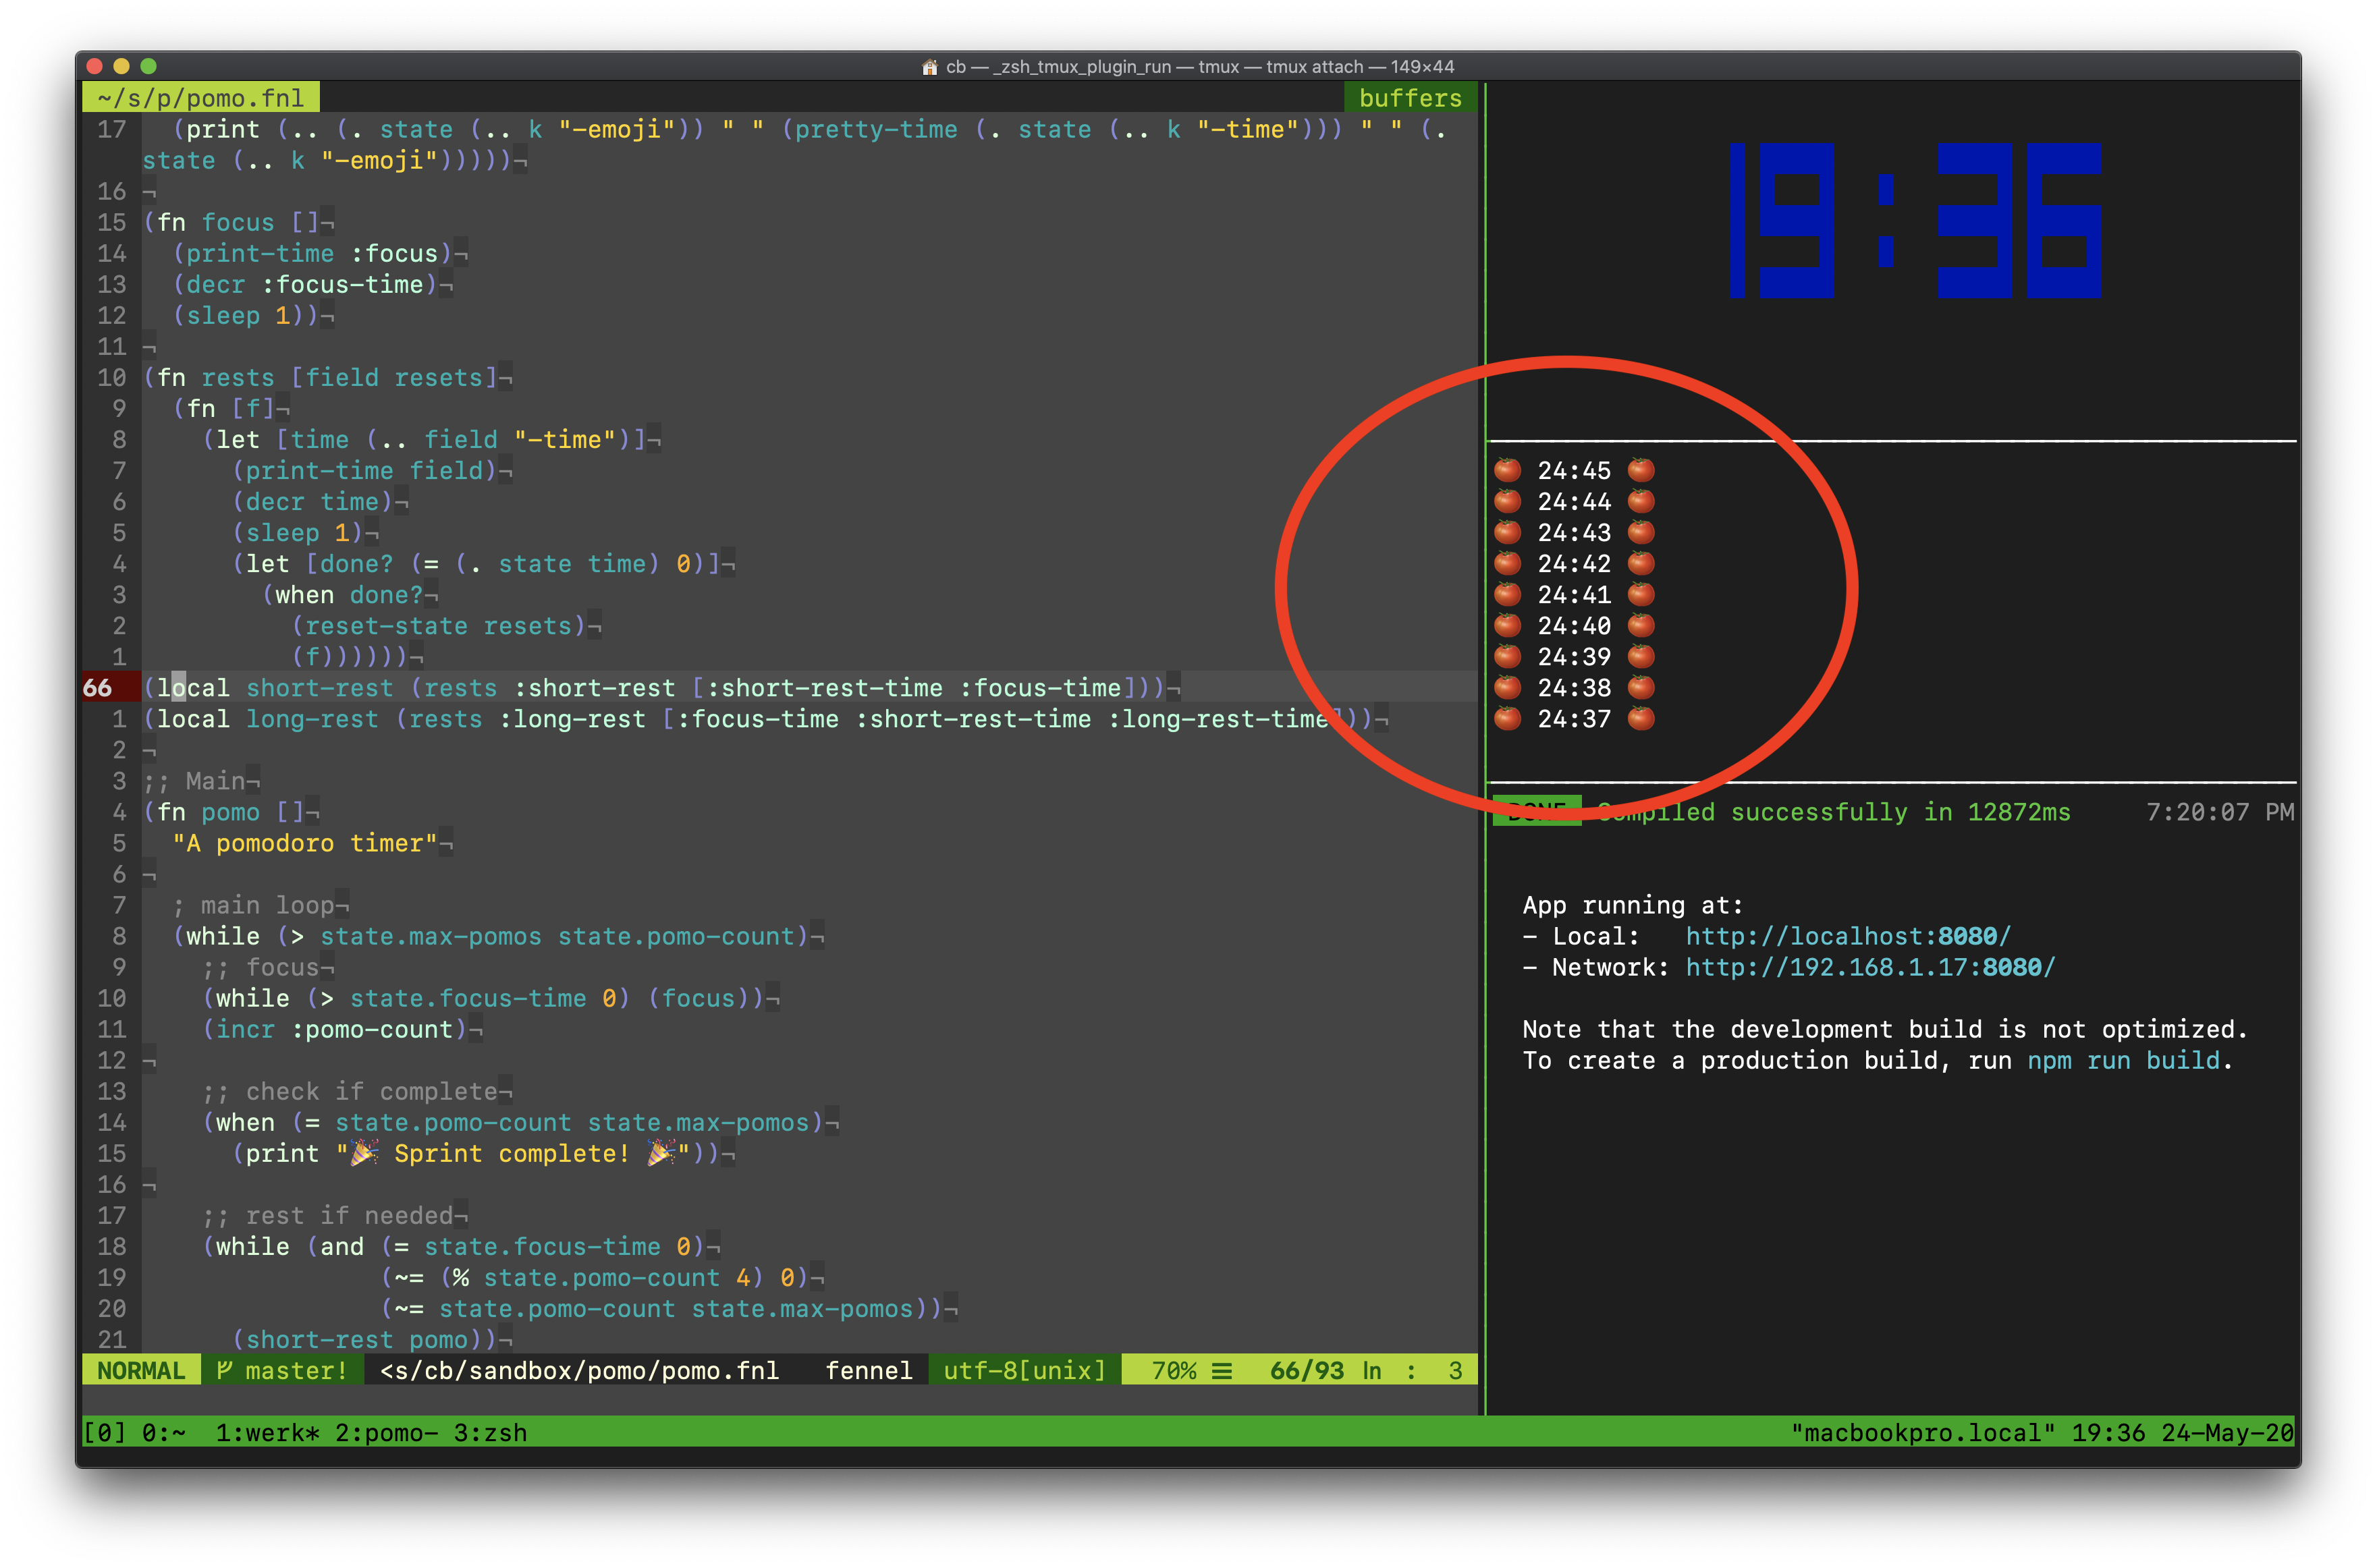 screenshot of pomo.fnl running in a small pane in tmux